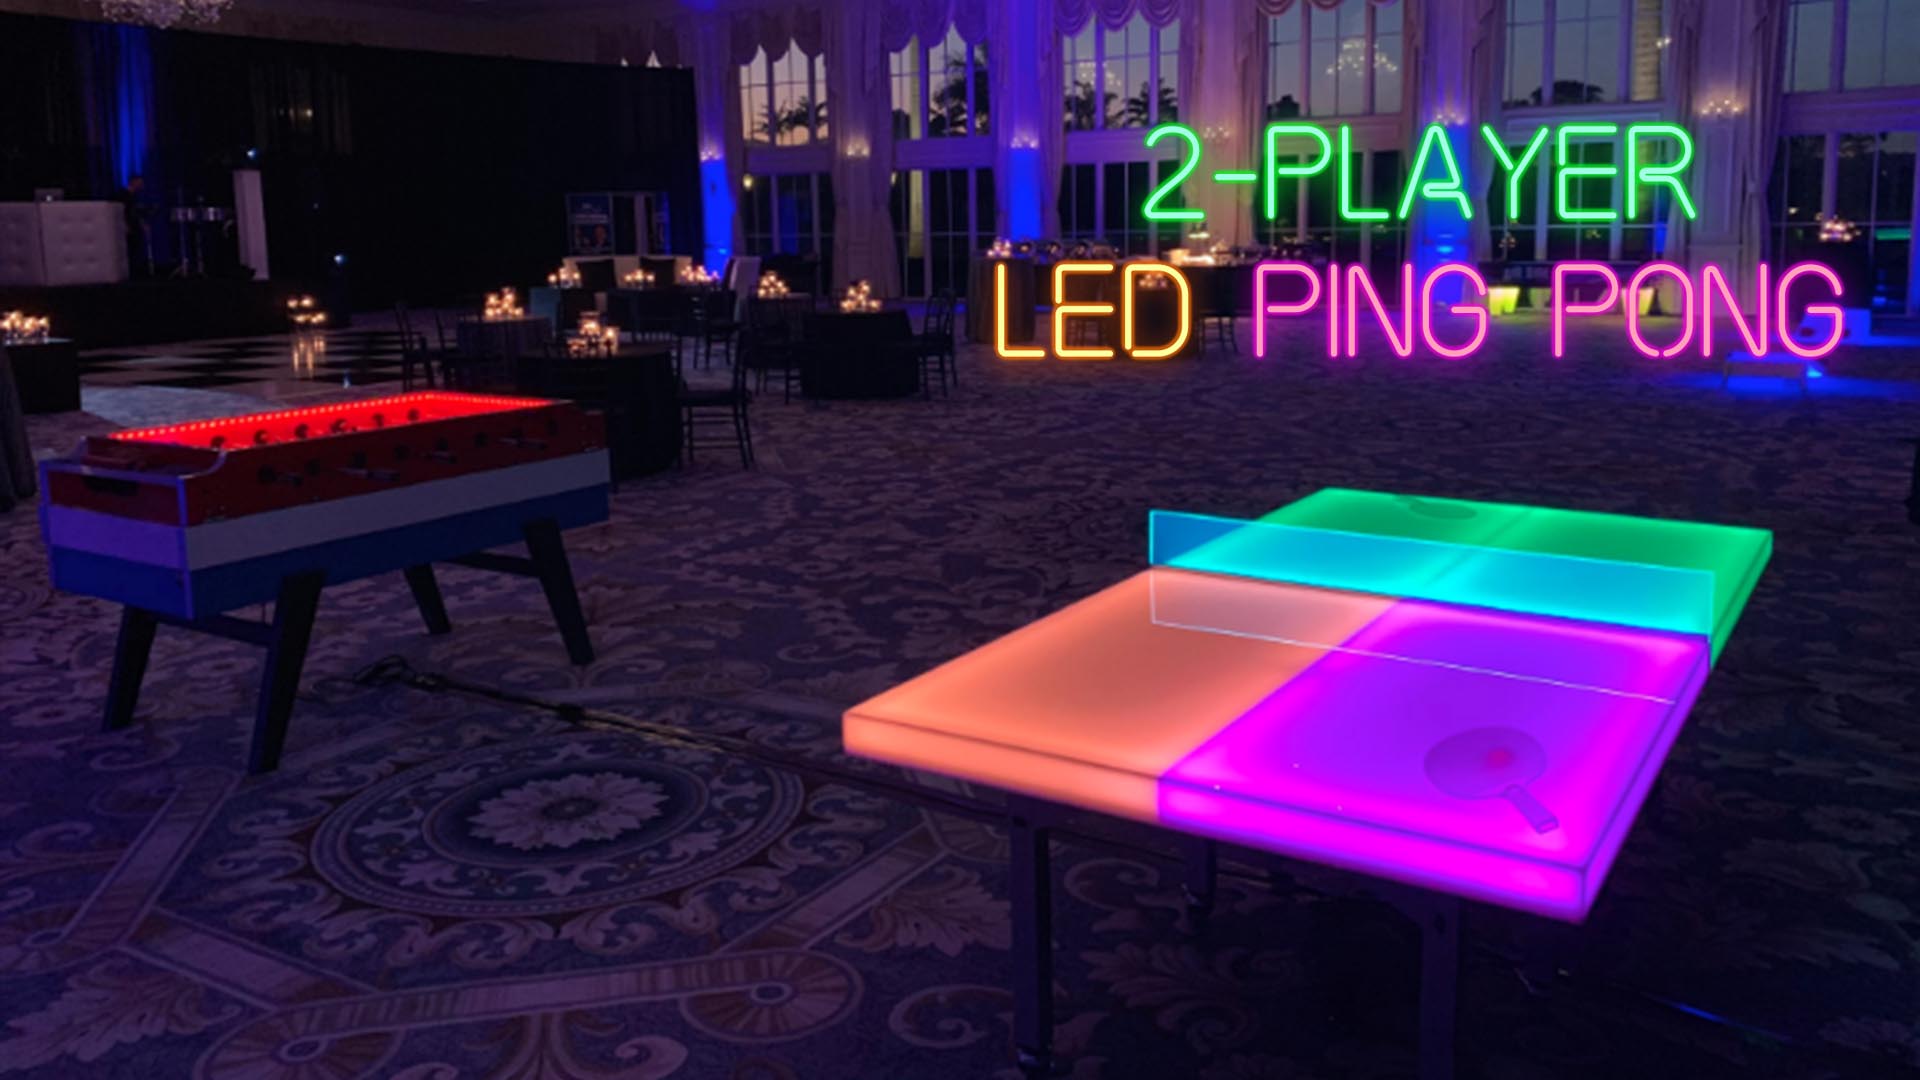 LED Ping Pong (2-Player) in Florida